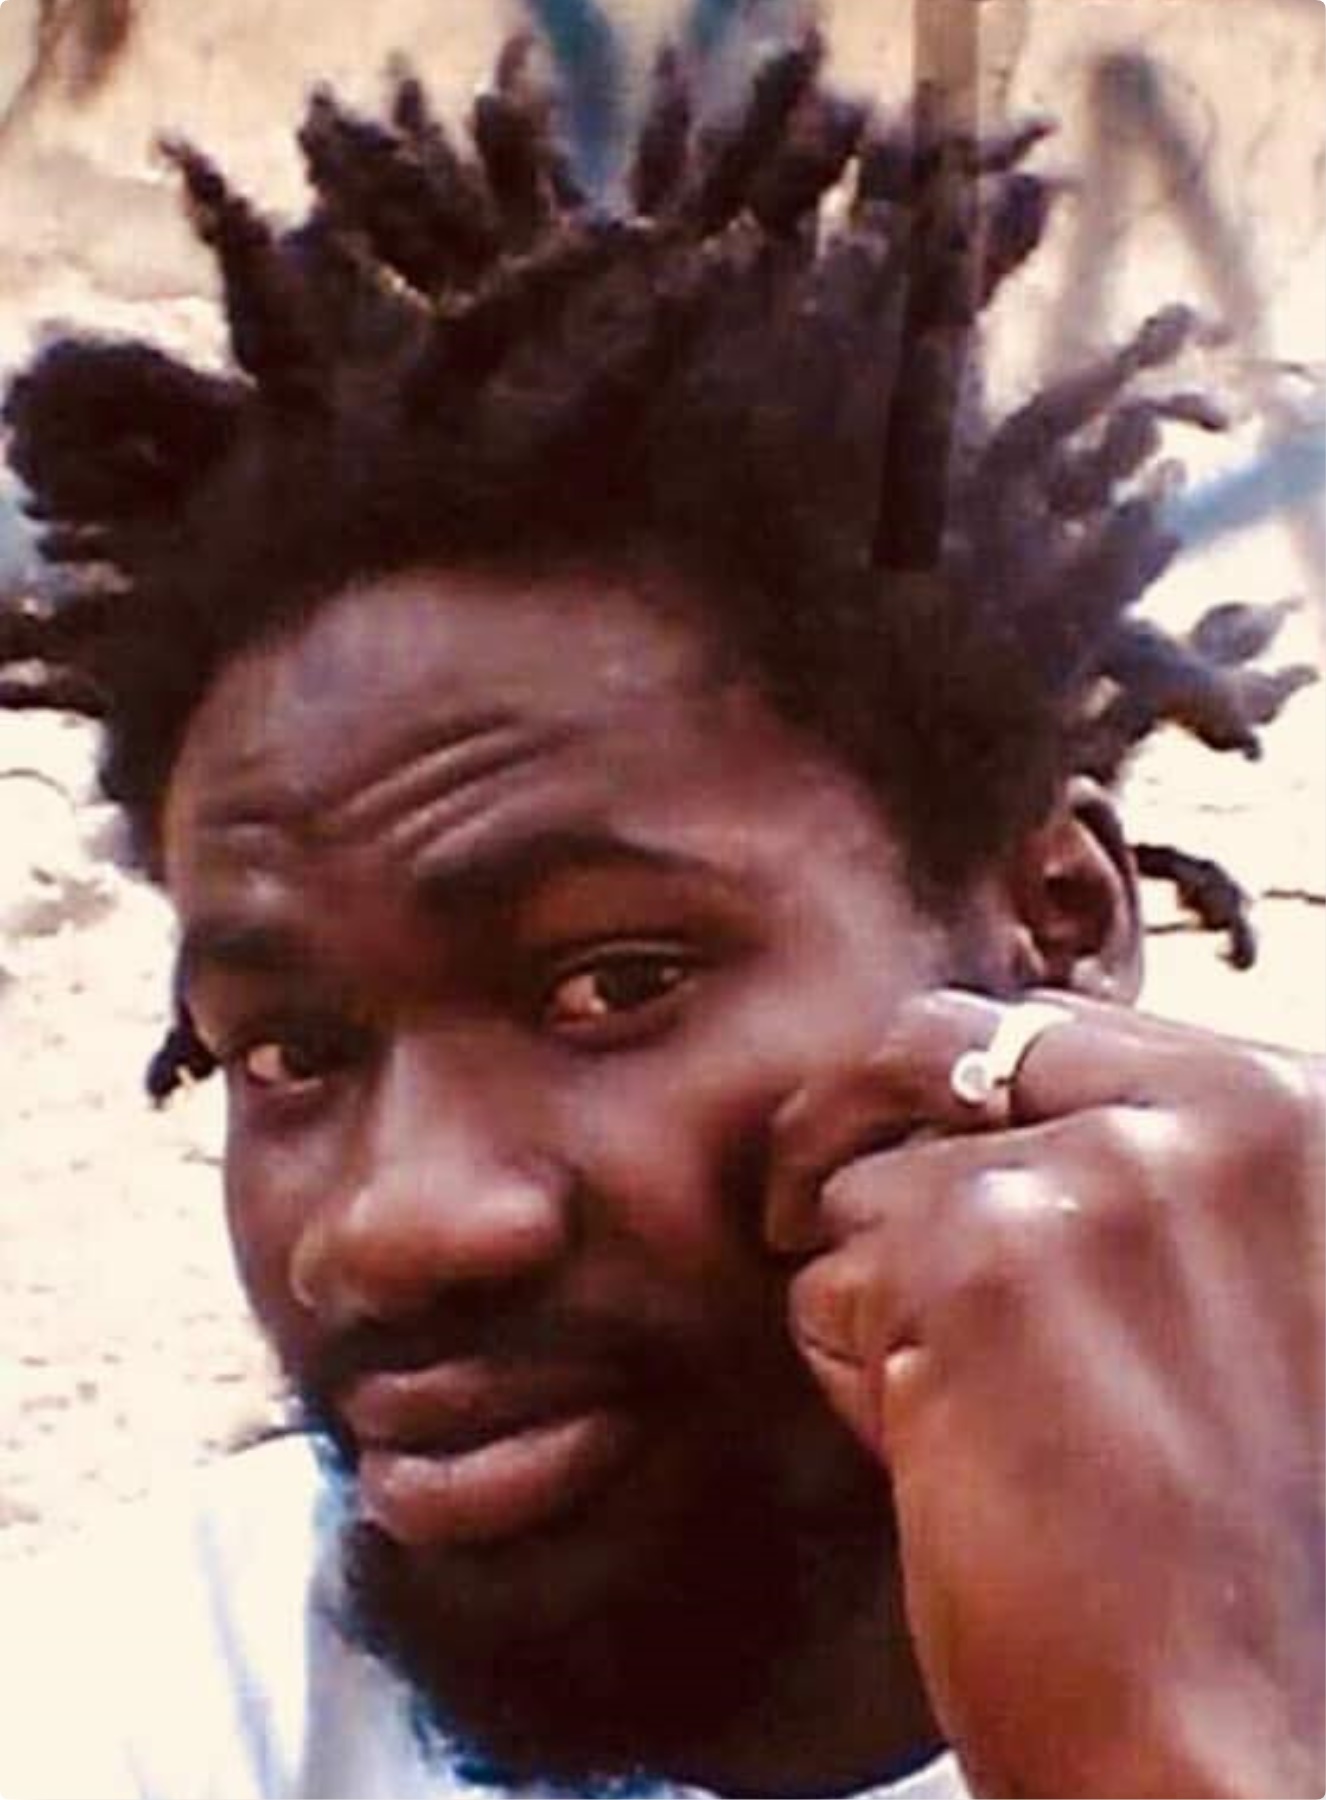 Photo of the man who stabbed Kumawood actor pops up